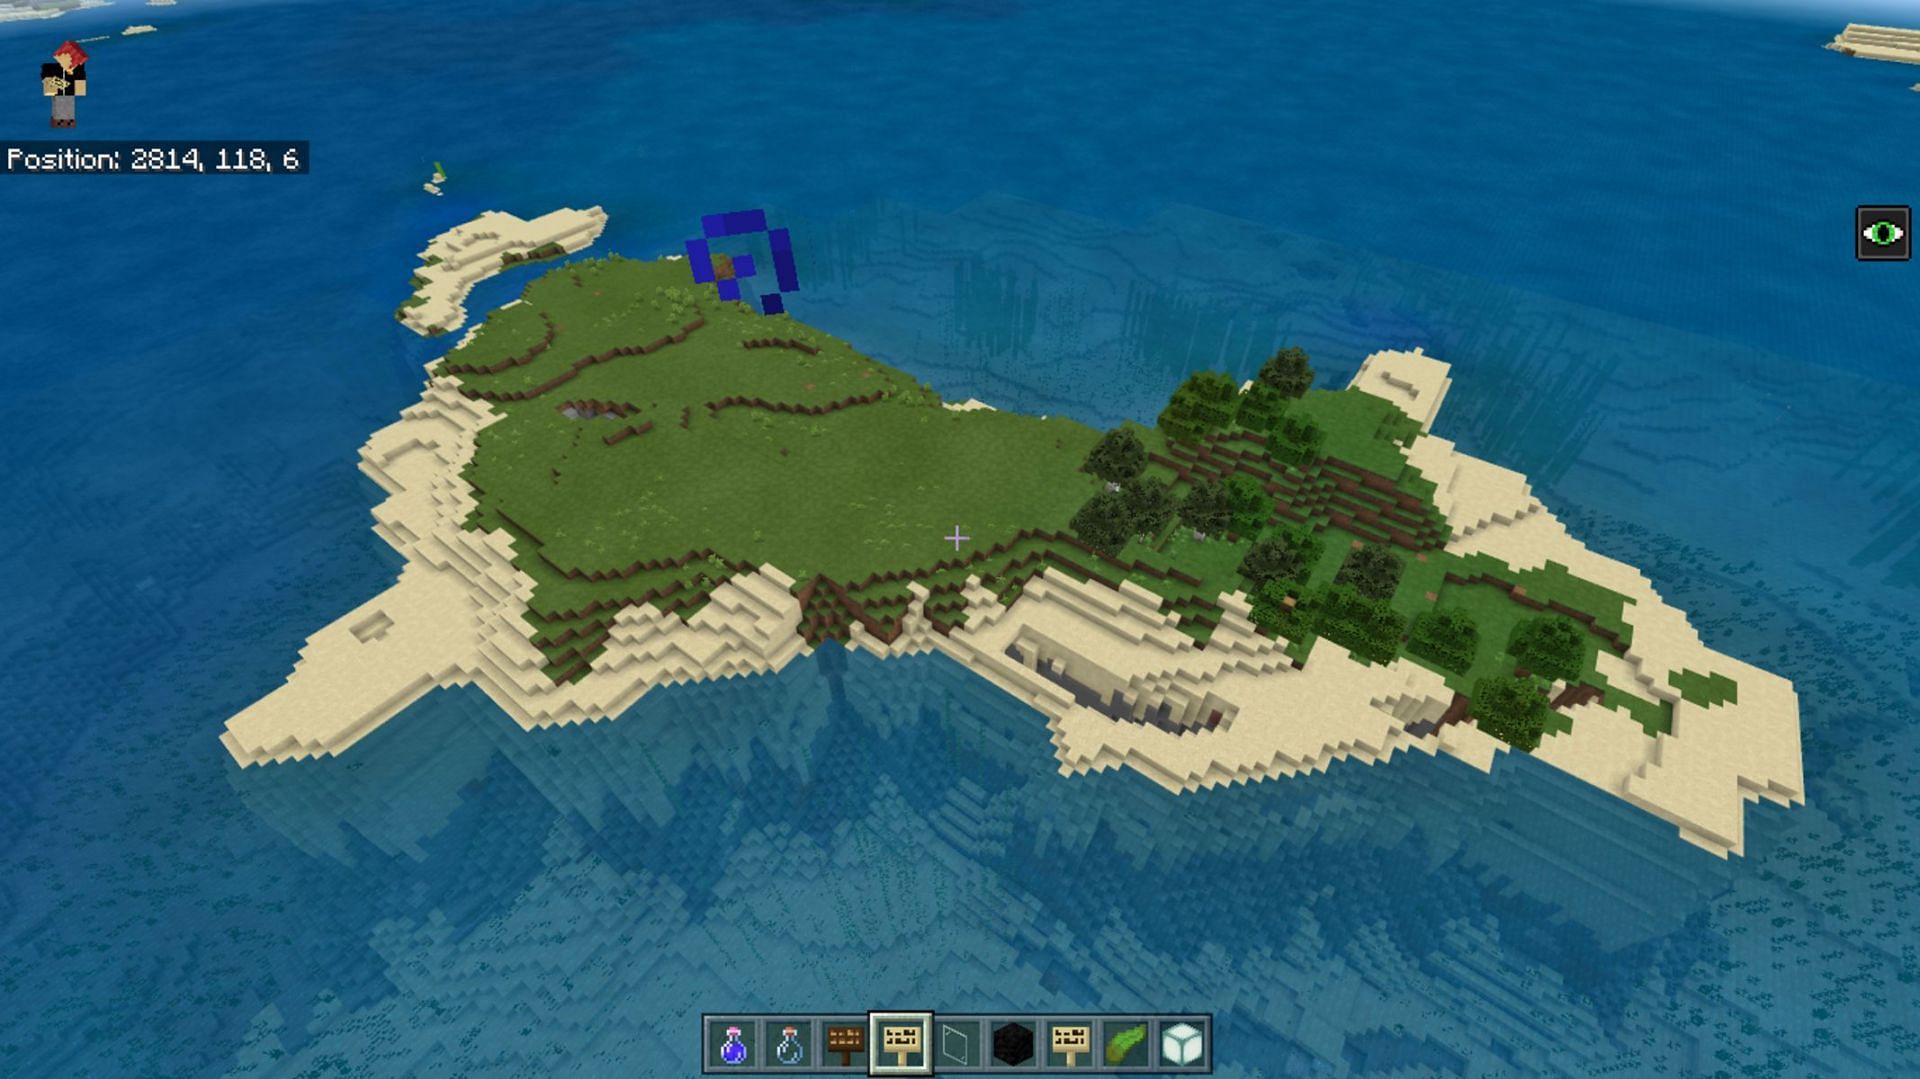 This seed benefits from a huge number of generated structures (Image via MinecraftSeeds)